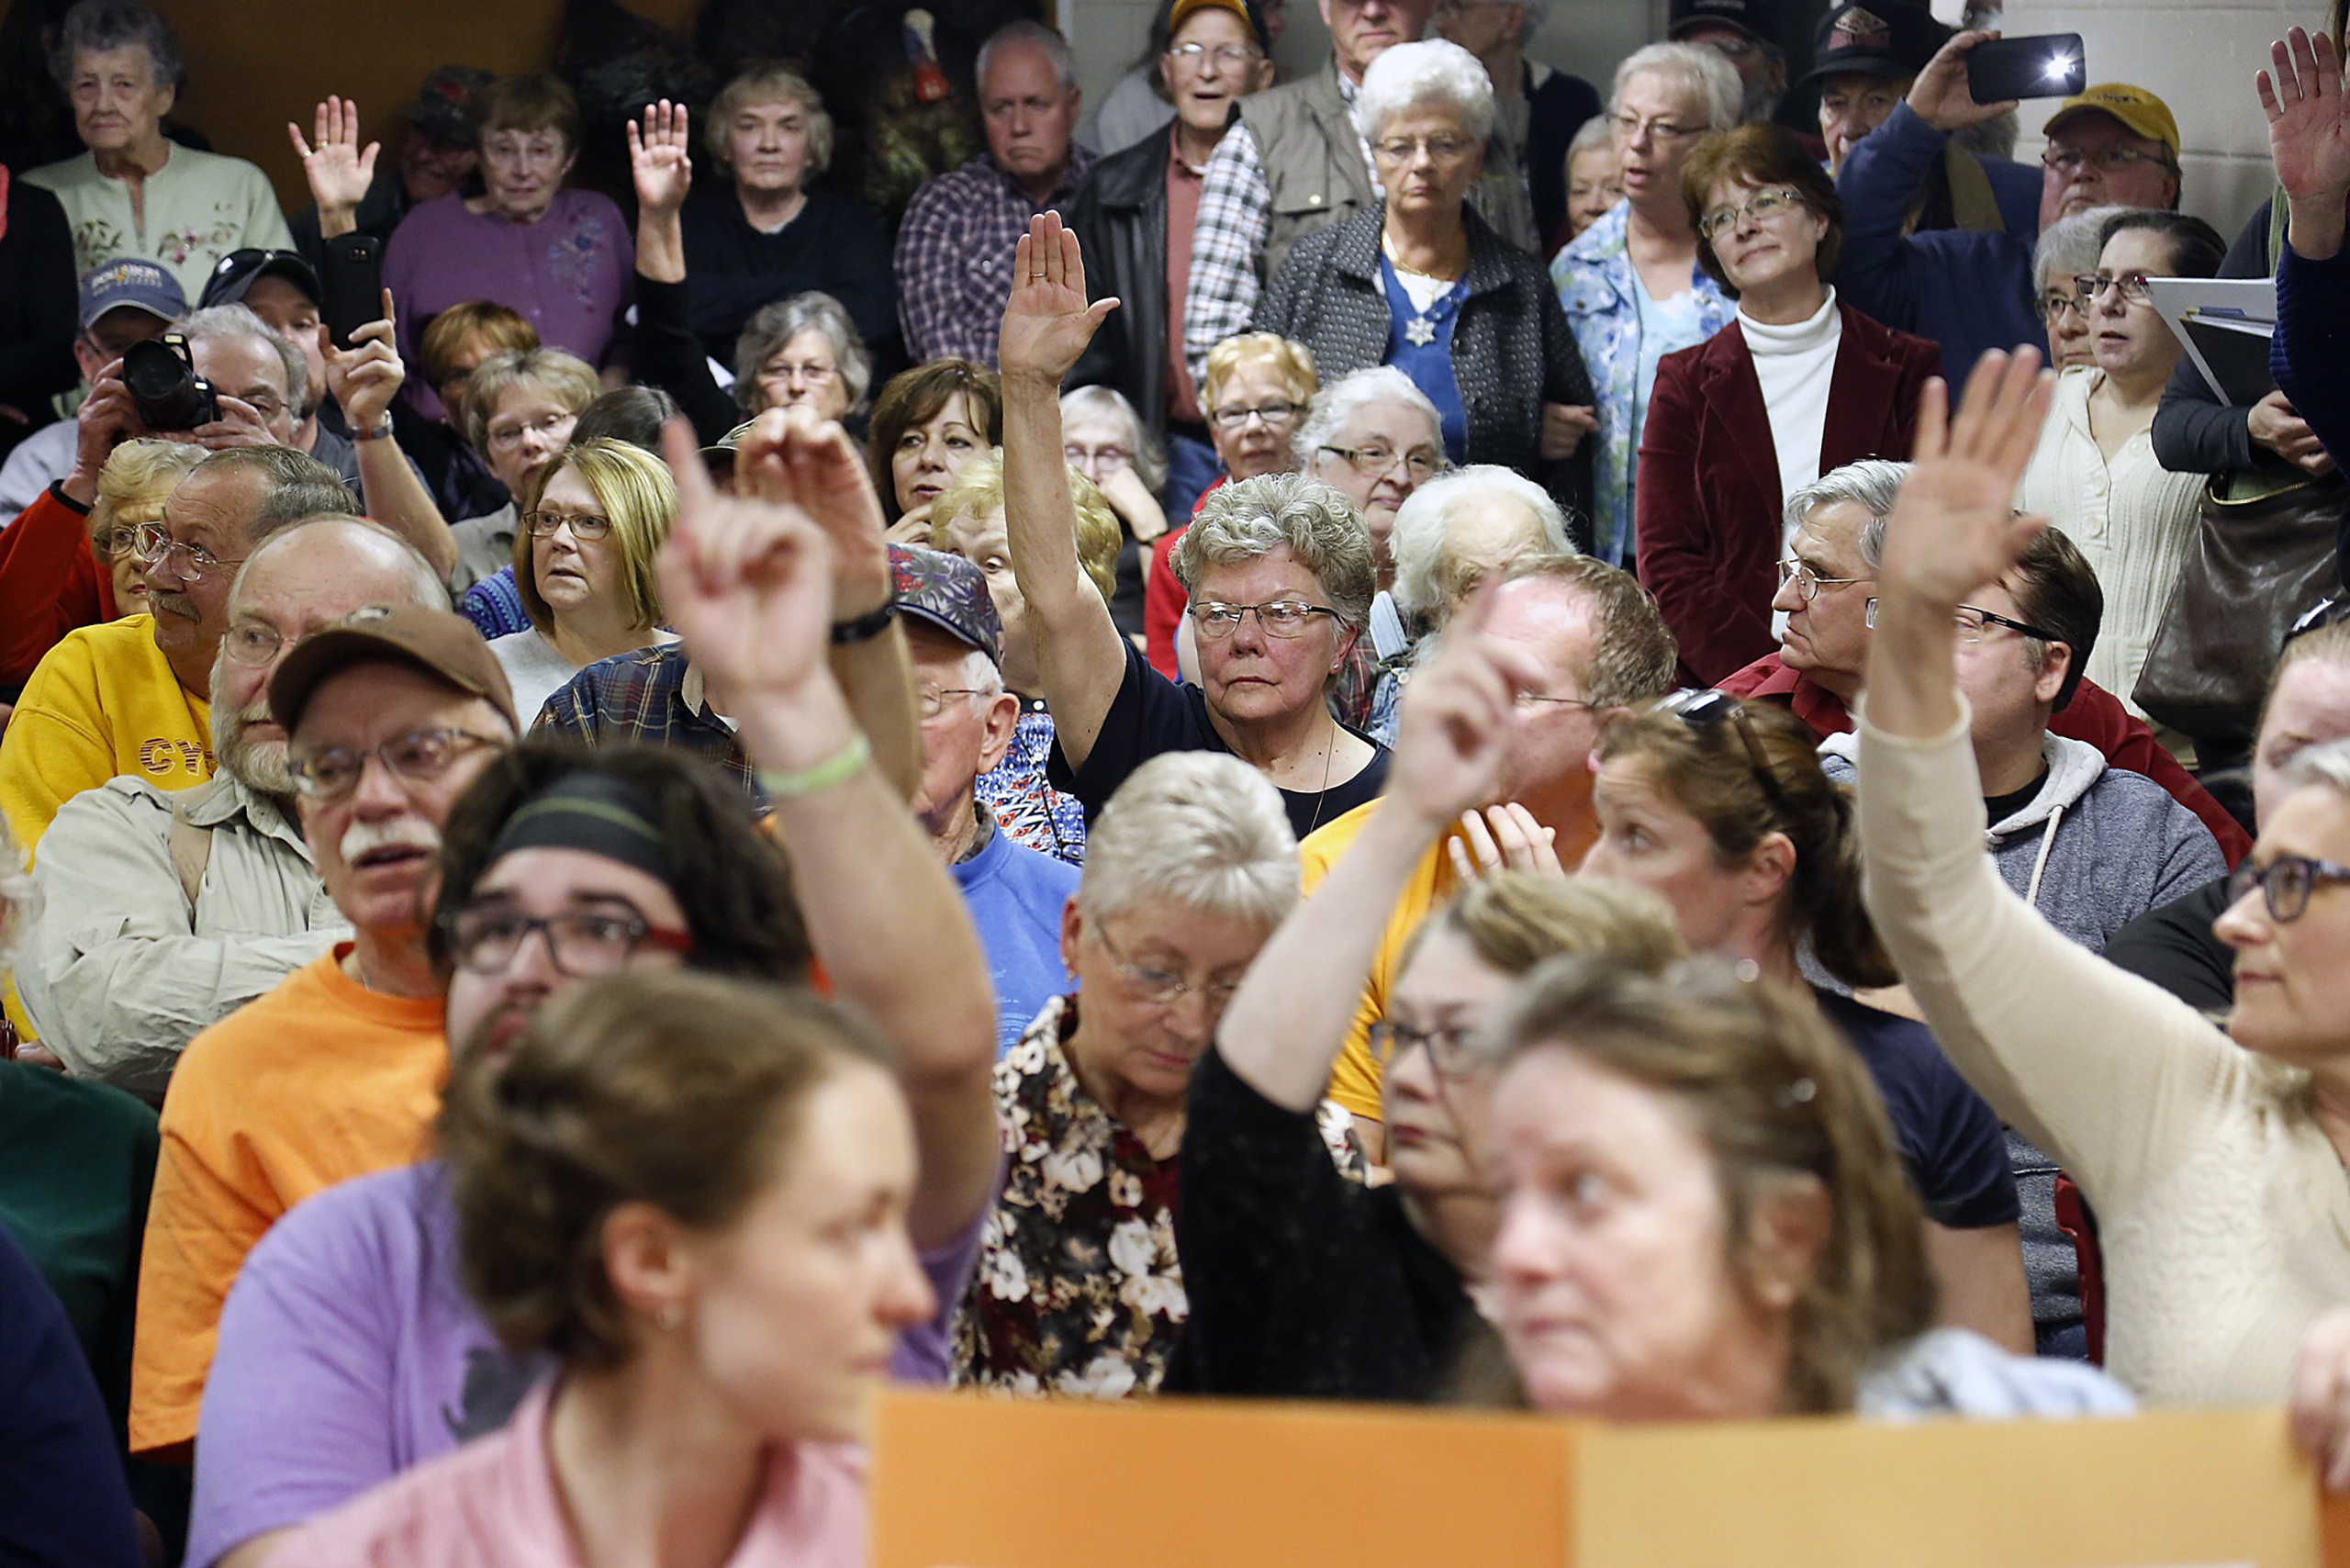 At town halls across the country, including this one for Senator Chuck Grassley in Garner, Iowa, on Feb. 21, voters have raised concerns about losing benefits under plans to repeal and replace Obamacare. (The Washington Post—Getty Images)